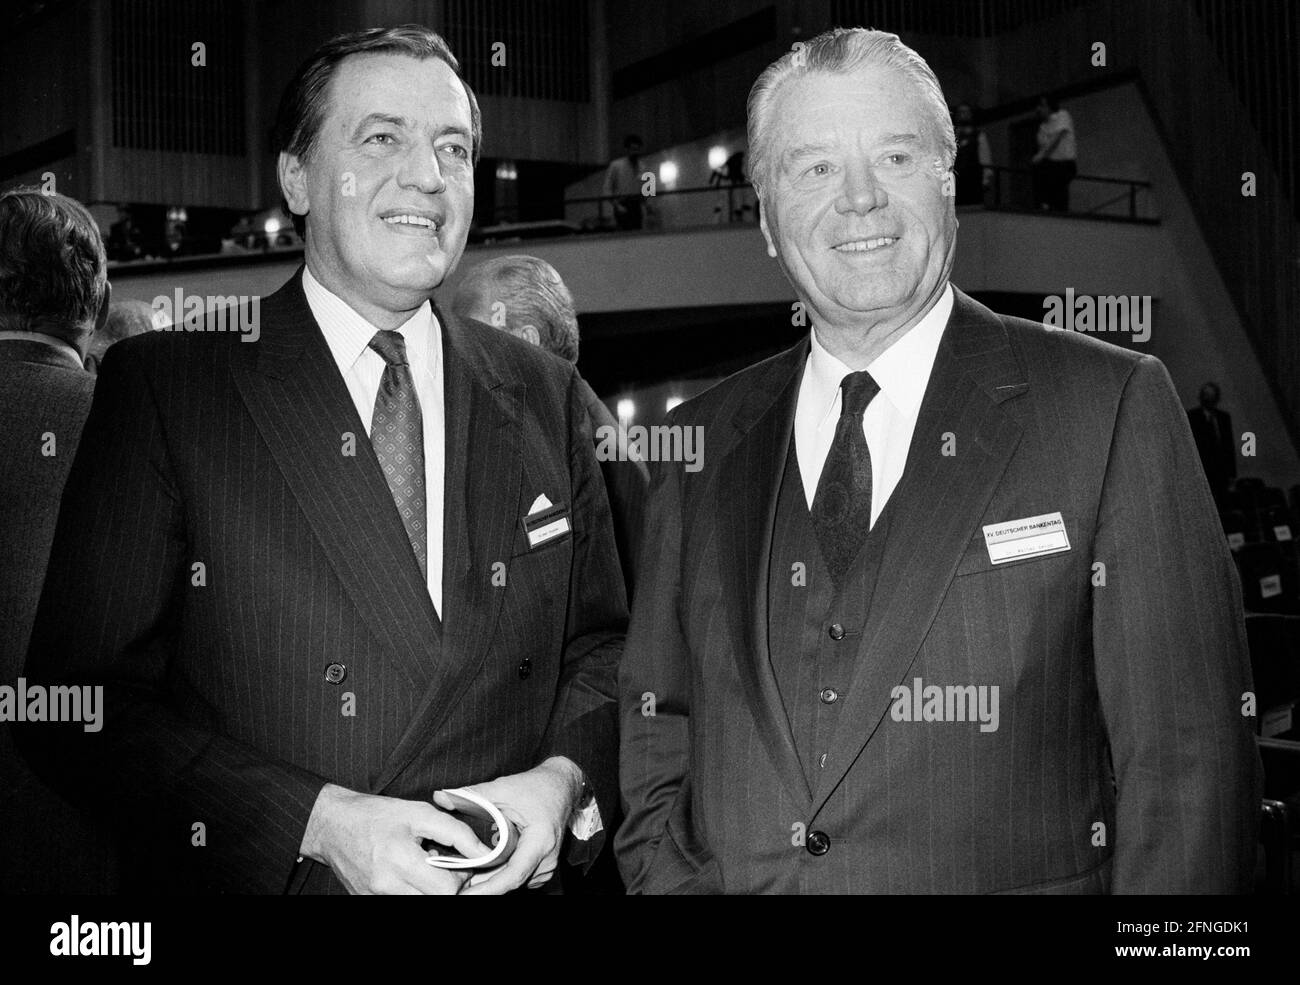 Hilmar KOPPER , Chairman of the Board of Managing Directors of Deutsche Bank AG , and Walter SEIPP , Chairman of the Board of Managing Directors of Commerzbank AG , April 1990 [automated translation] Stock Photo